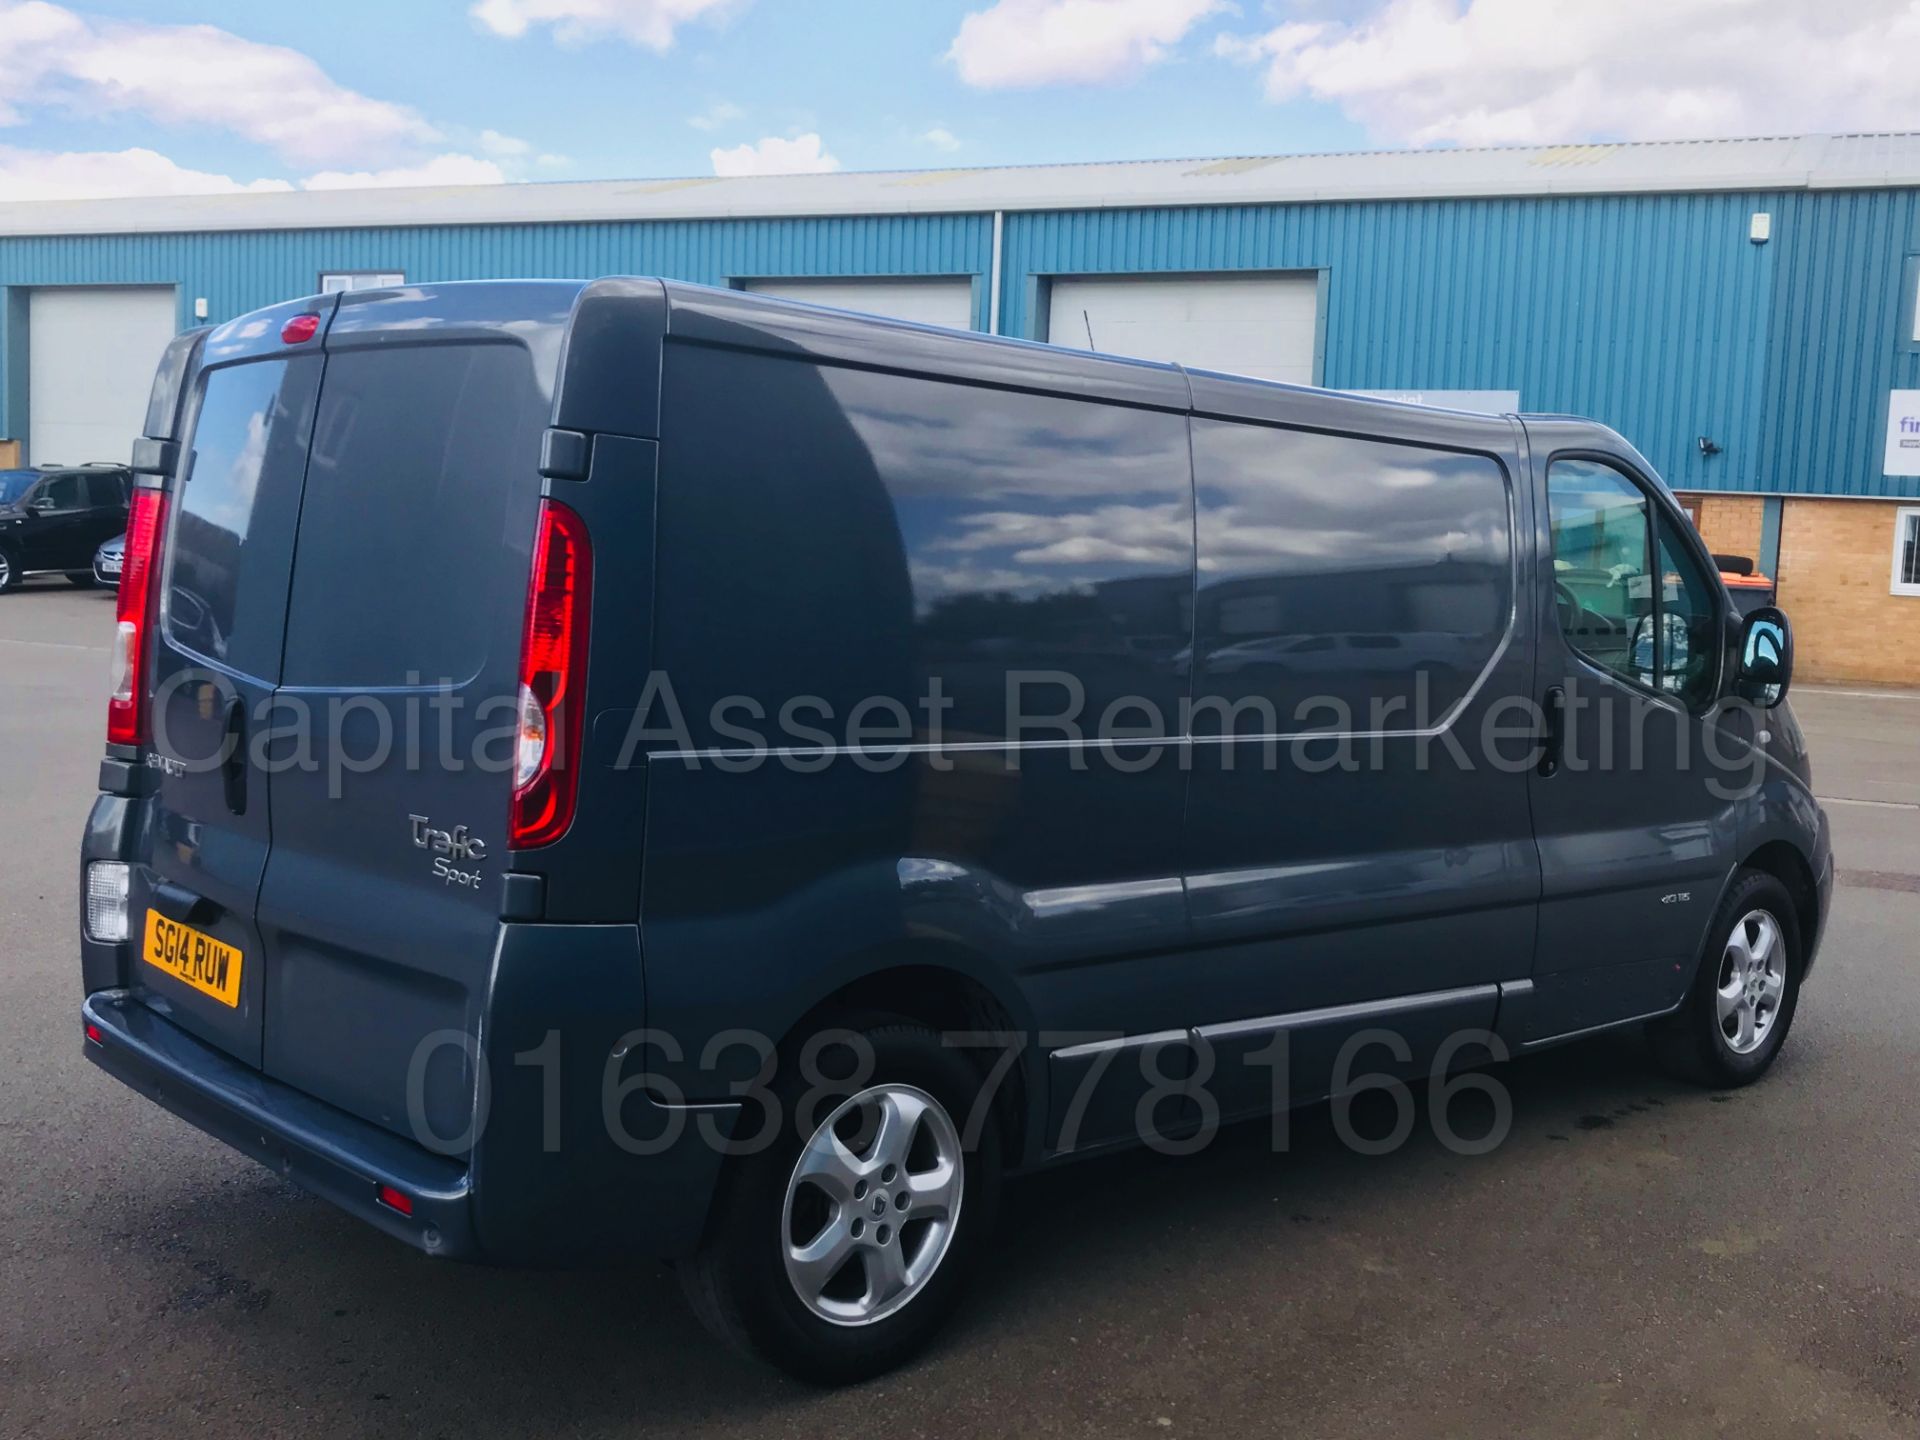 (On Sale) RENAULT TRAFIC 'SPORT EDITION' LWB (2014) '2.0 DCI - 115 BHP - 6 SPEED' *AIR CON* (NO VAT) - Image 8 of 40